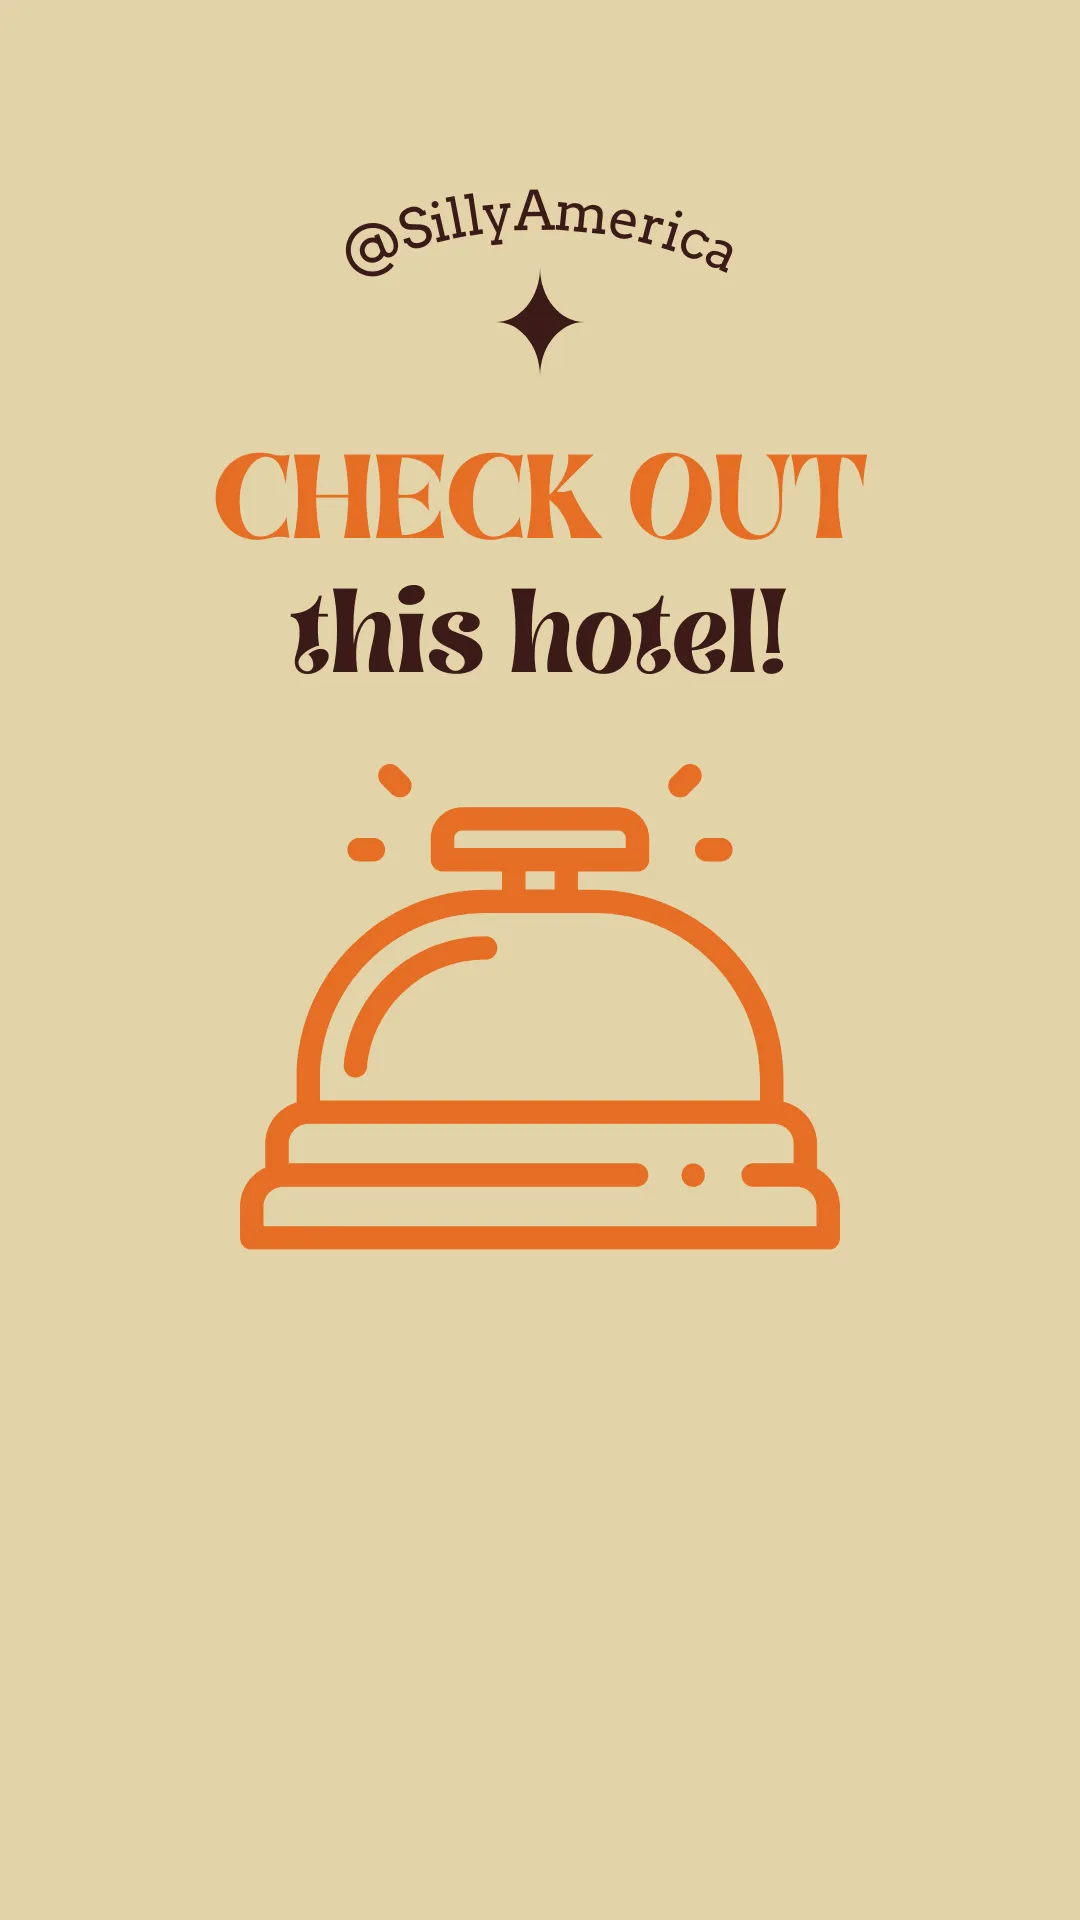 16 Funny Hotel Puns for Social Media - CHECK OUT this hotel!